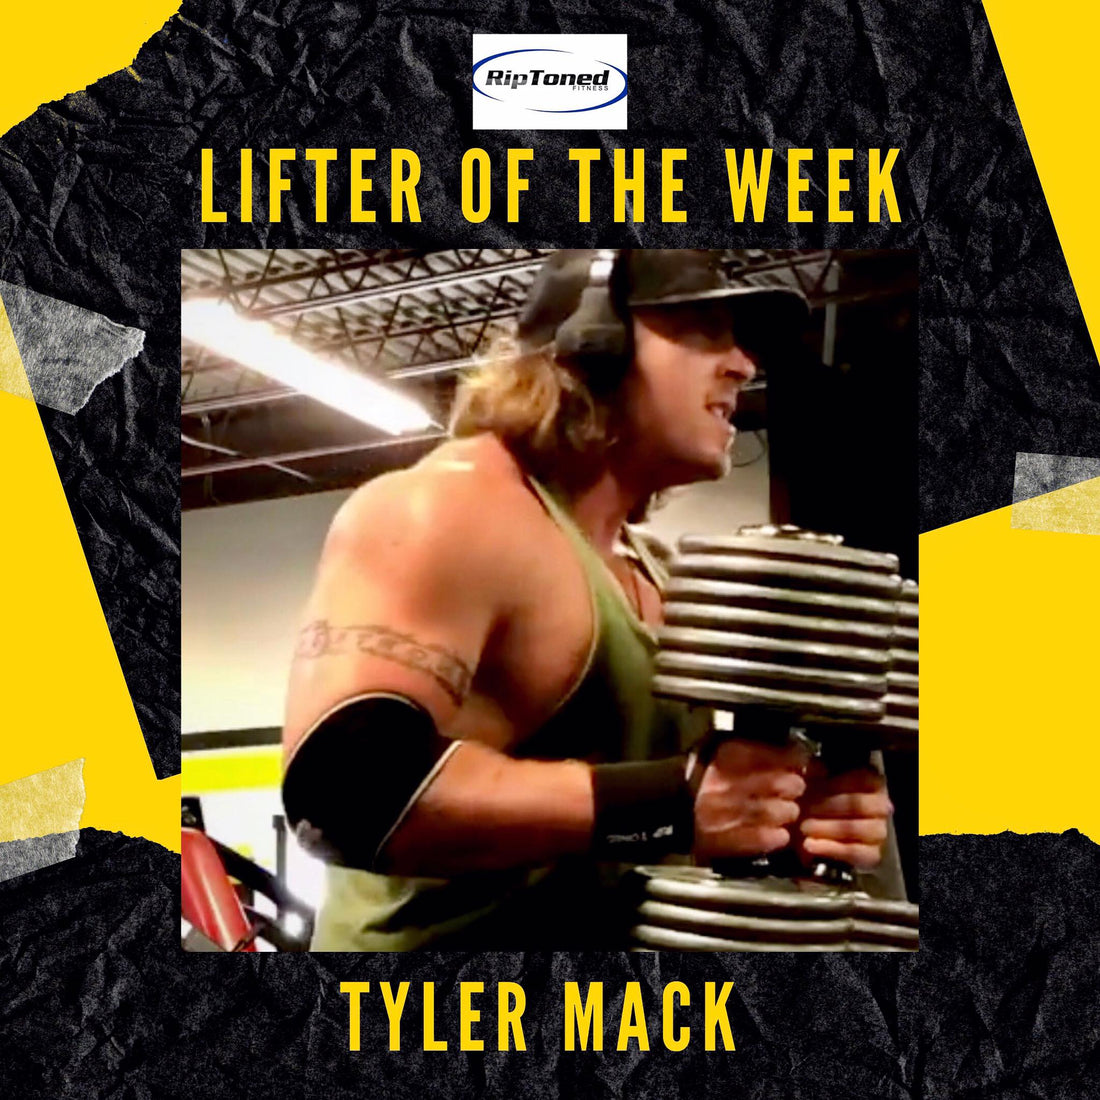 Lifter of the Week - Tyler Mack - Rip Toned